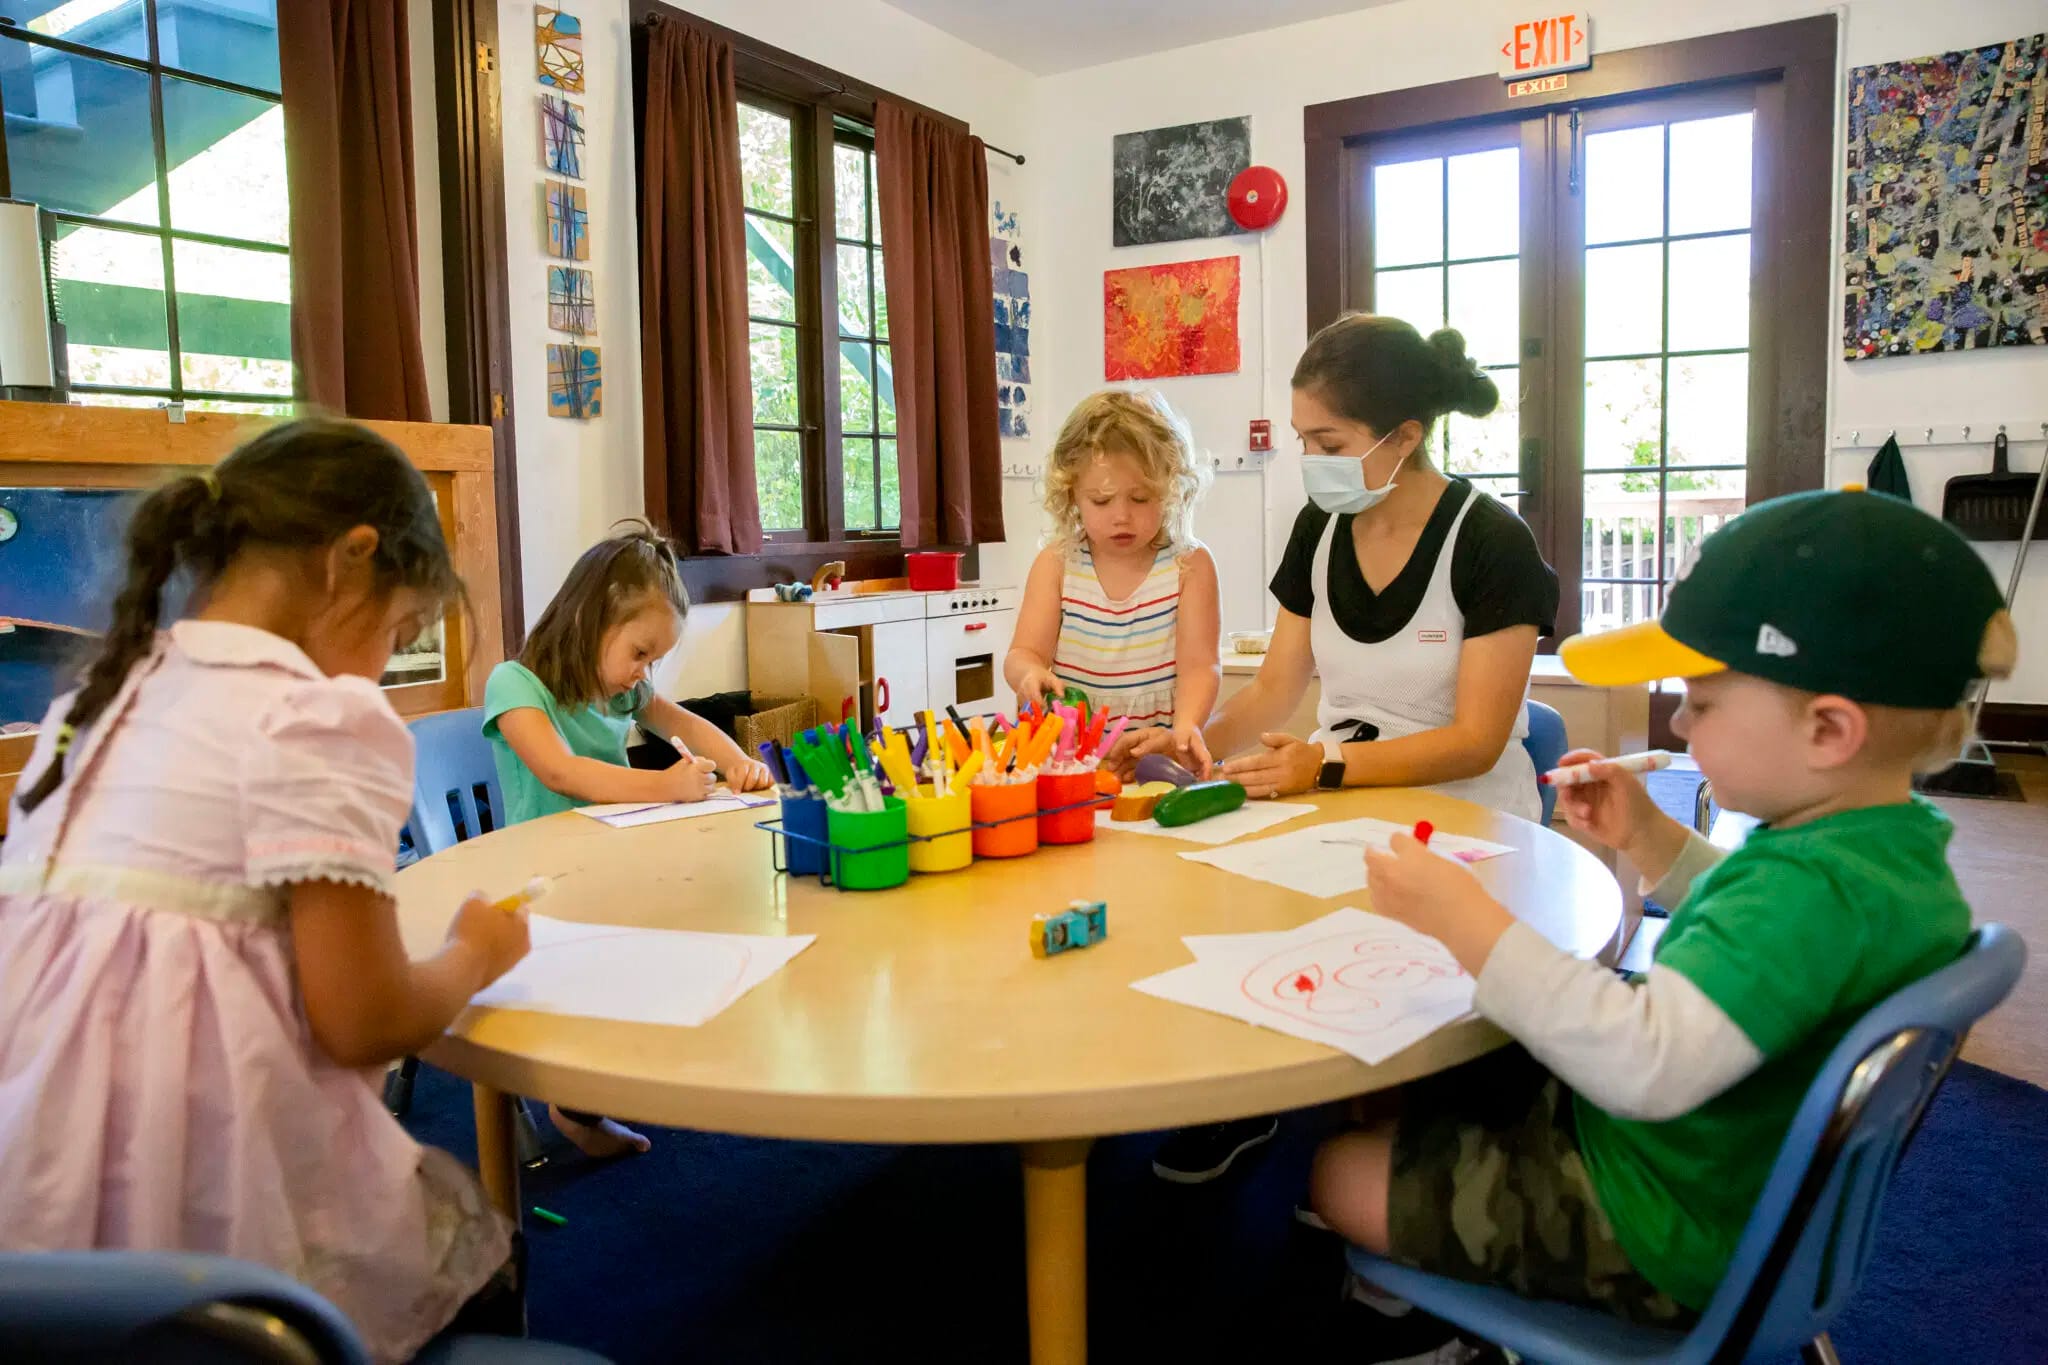 A-Child-Care-teacher-with-four-children-around-a-table-working-on-drawings